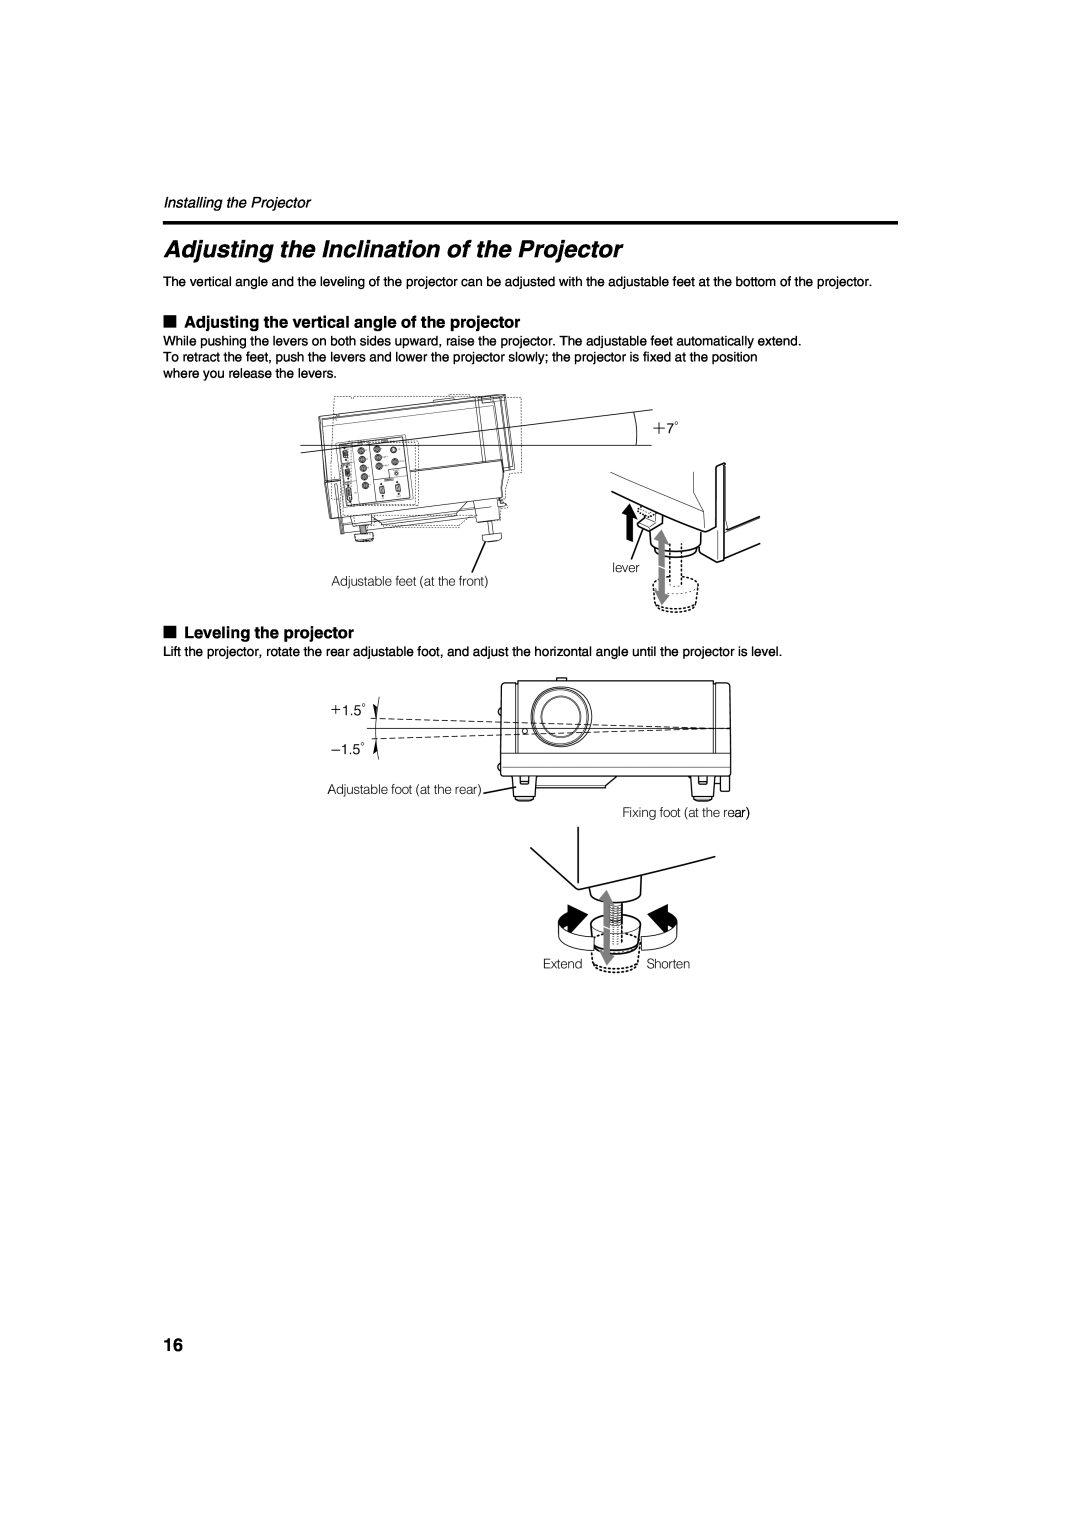 Meridian Audio FDP-DILA2 warranty Adjusting the Inclination of the Projector, Adjusting the vertical angle of the projector 